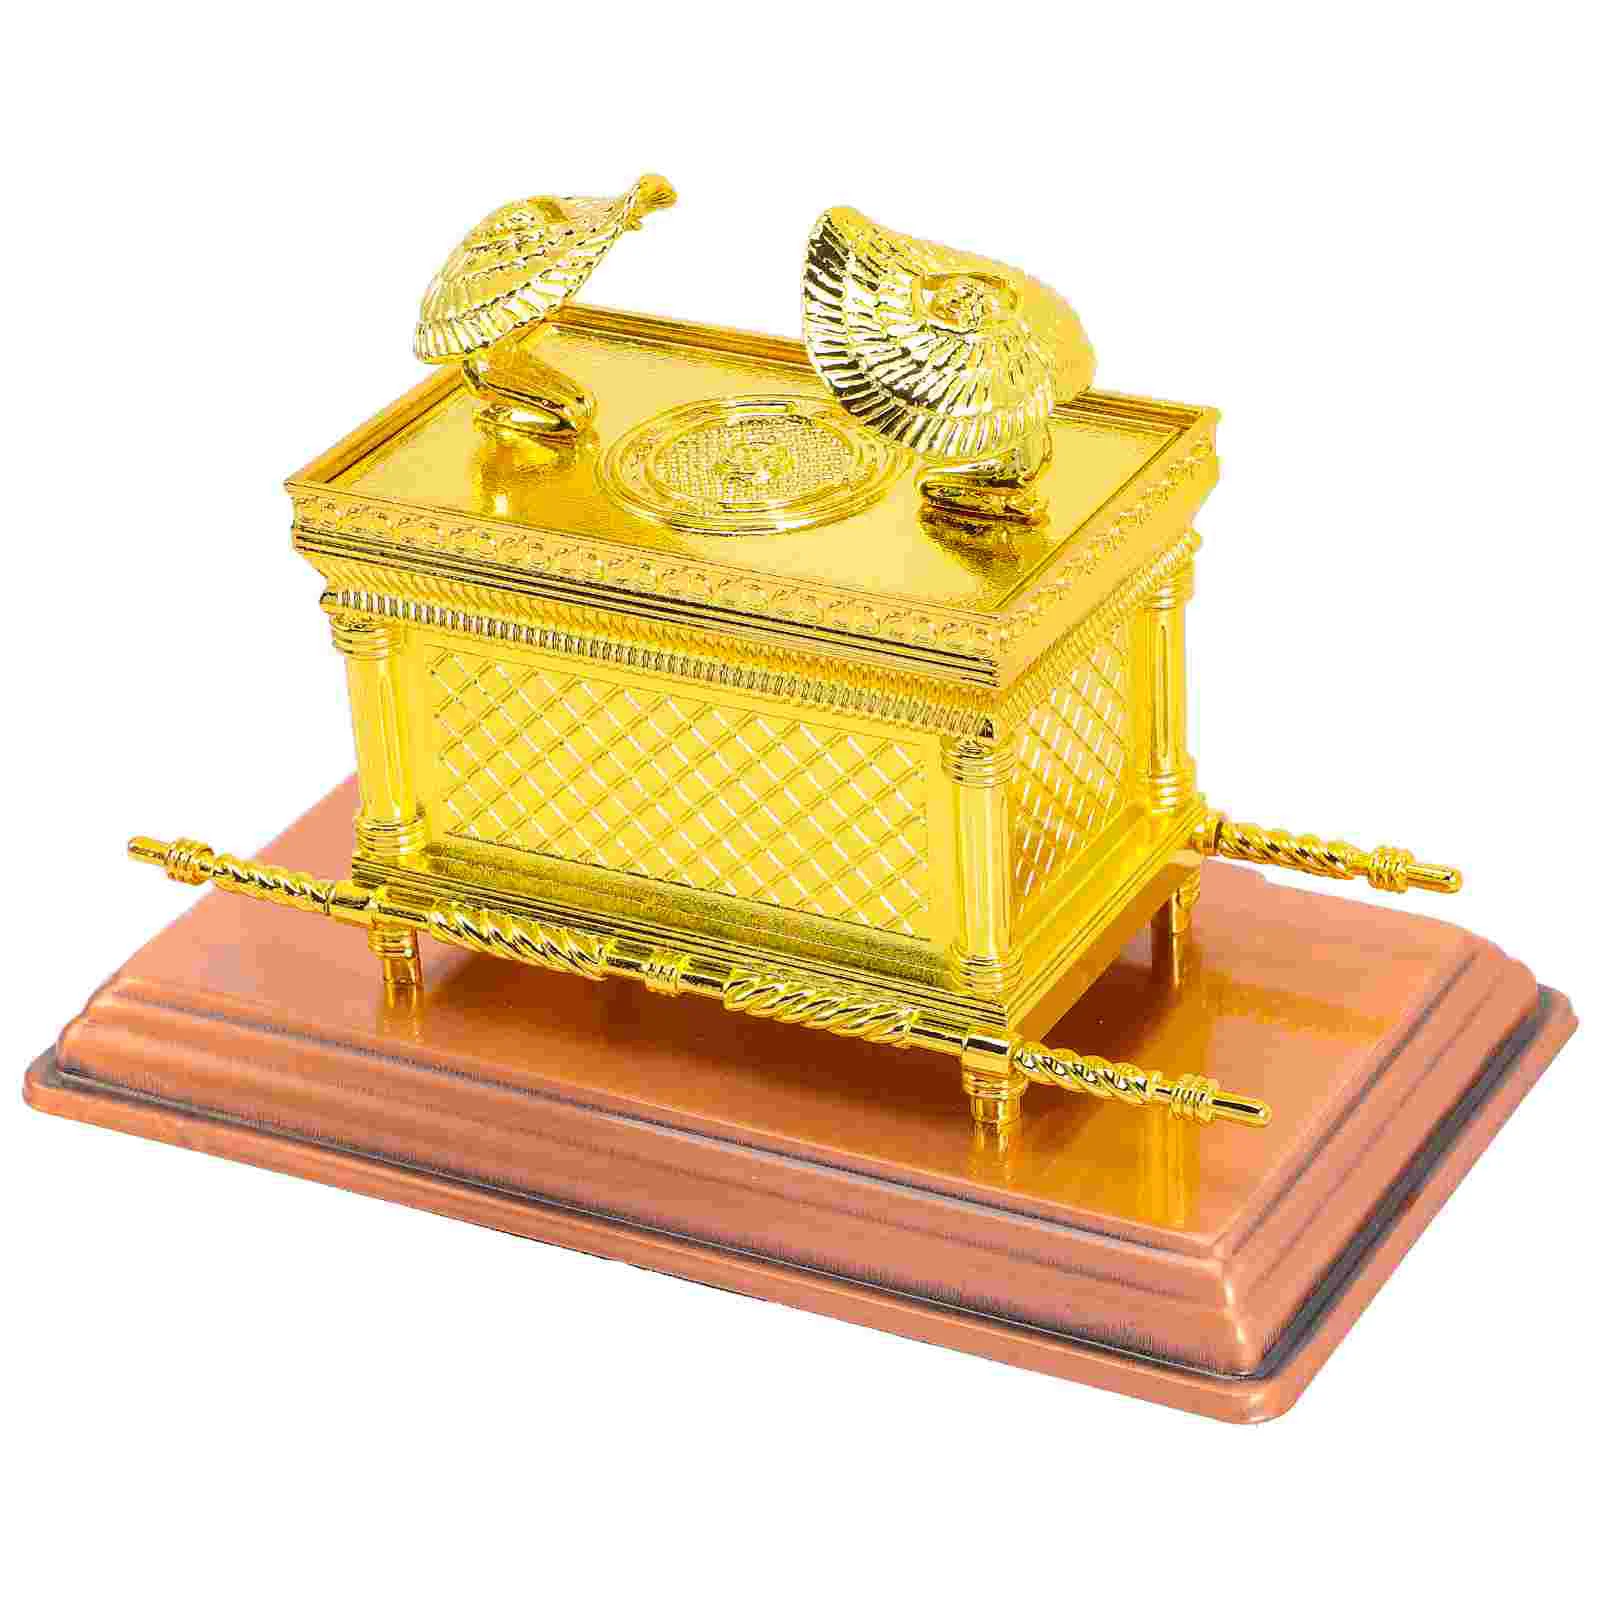 

Portable Premium Classical Exquisite The Ark Of The Covenant Model Religious Party Decoration for Home Decor Gift Option